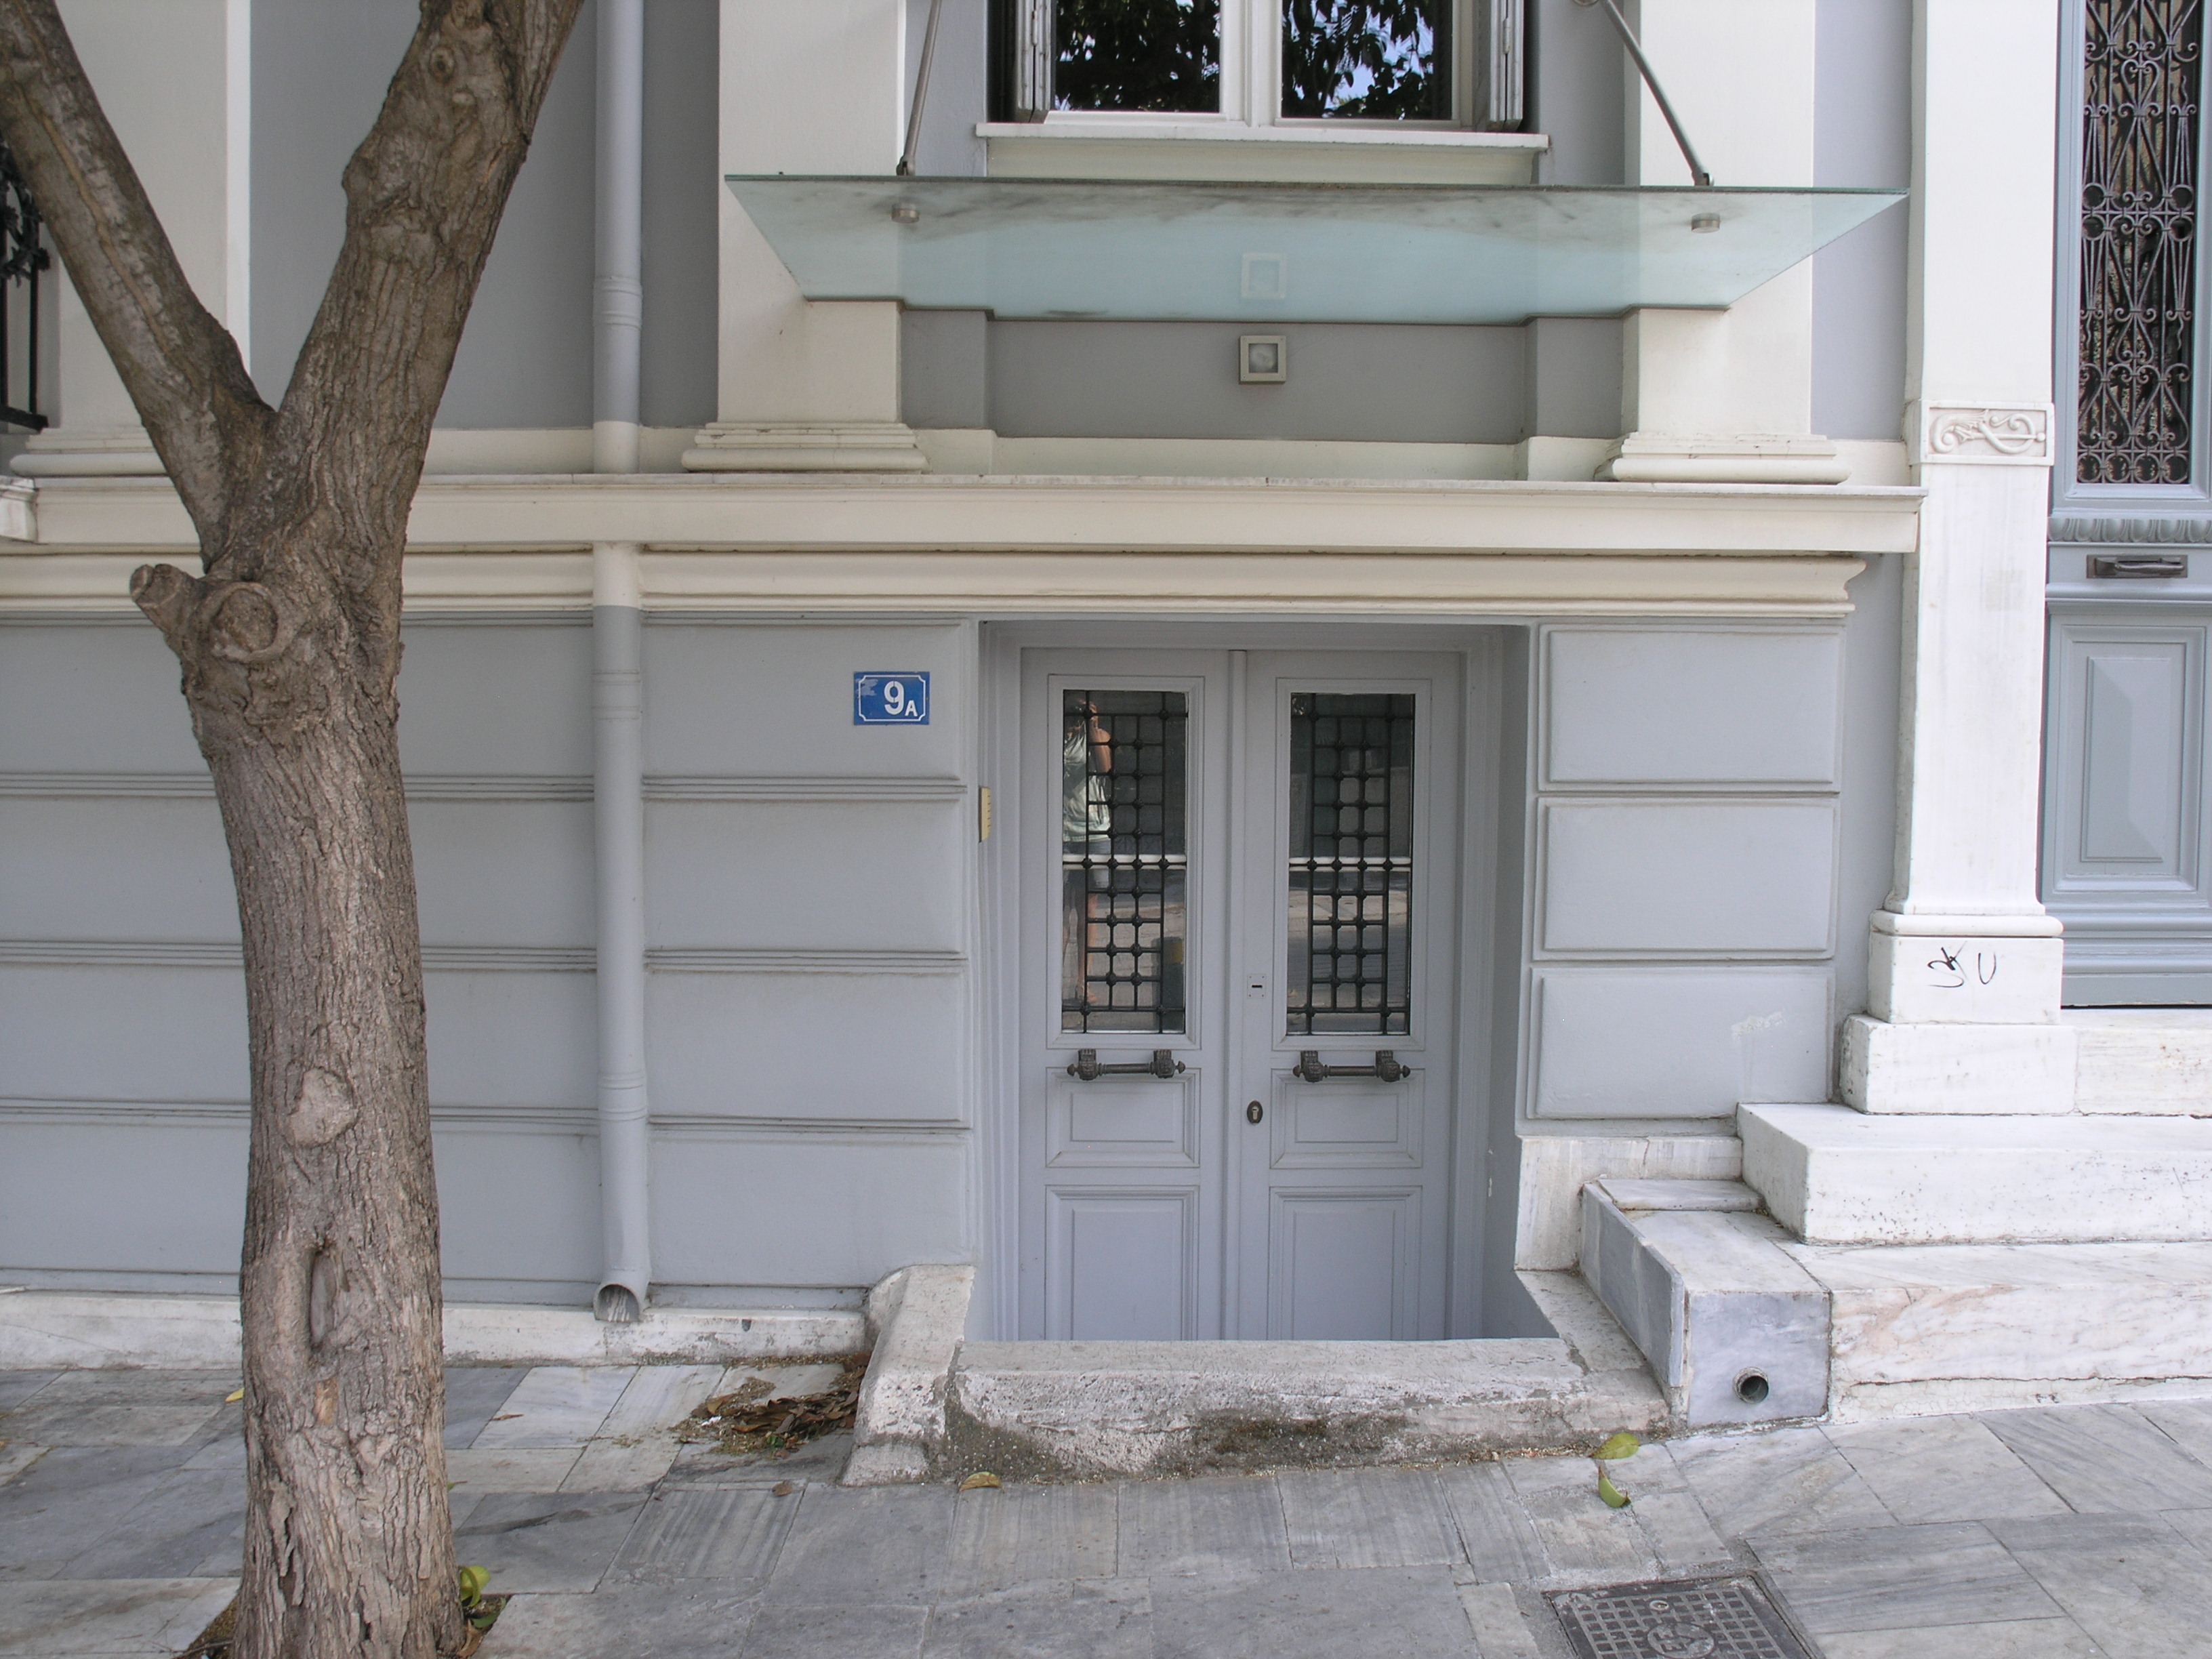 Detail of façade - View of the basement entrance